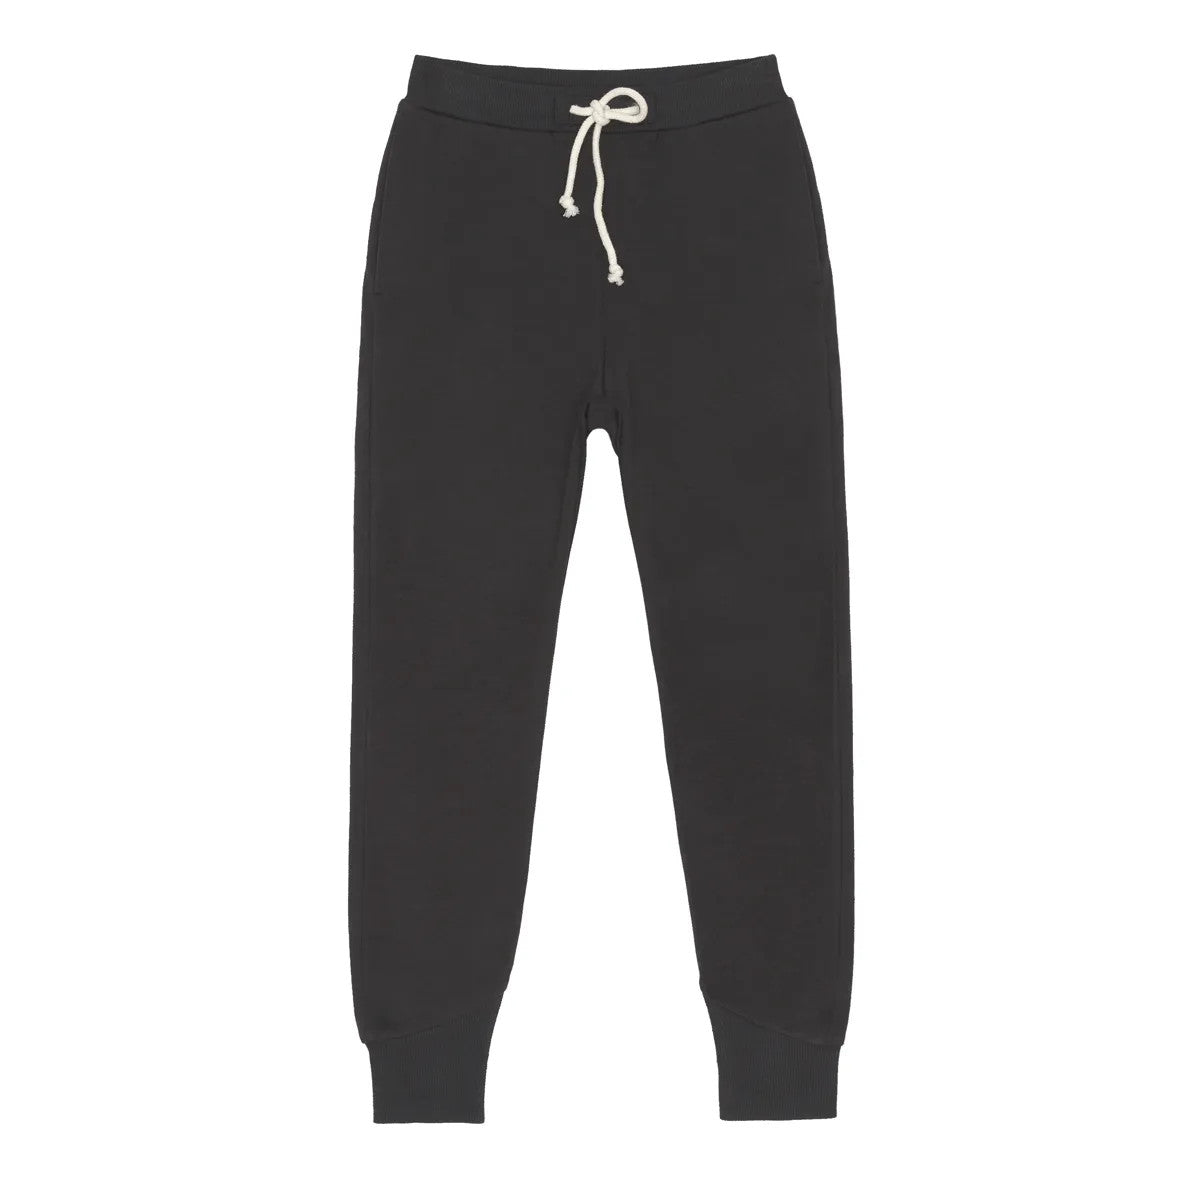 Little Hedonist skinny sweatpants in pirate black for boys and girls. Sustainable kids clothing made from organic cotton.